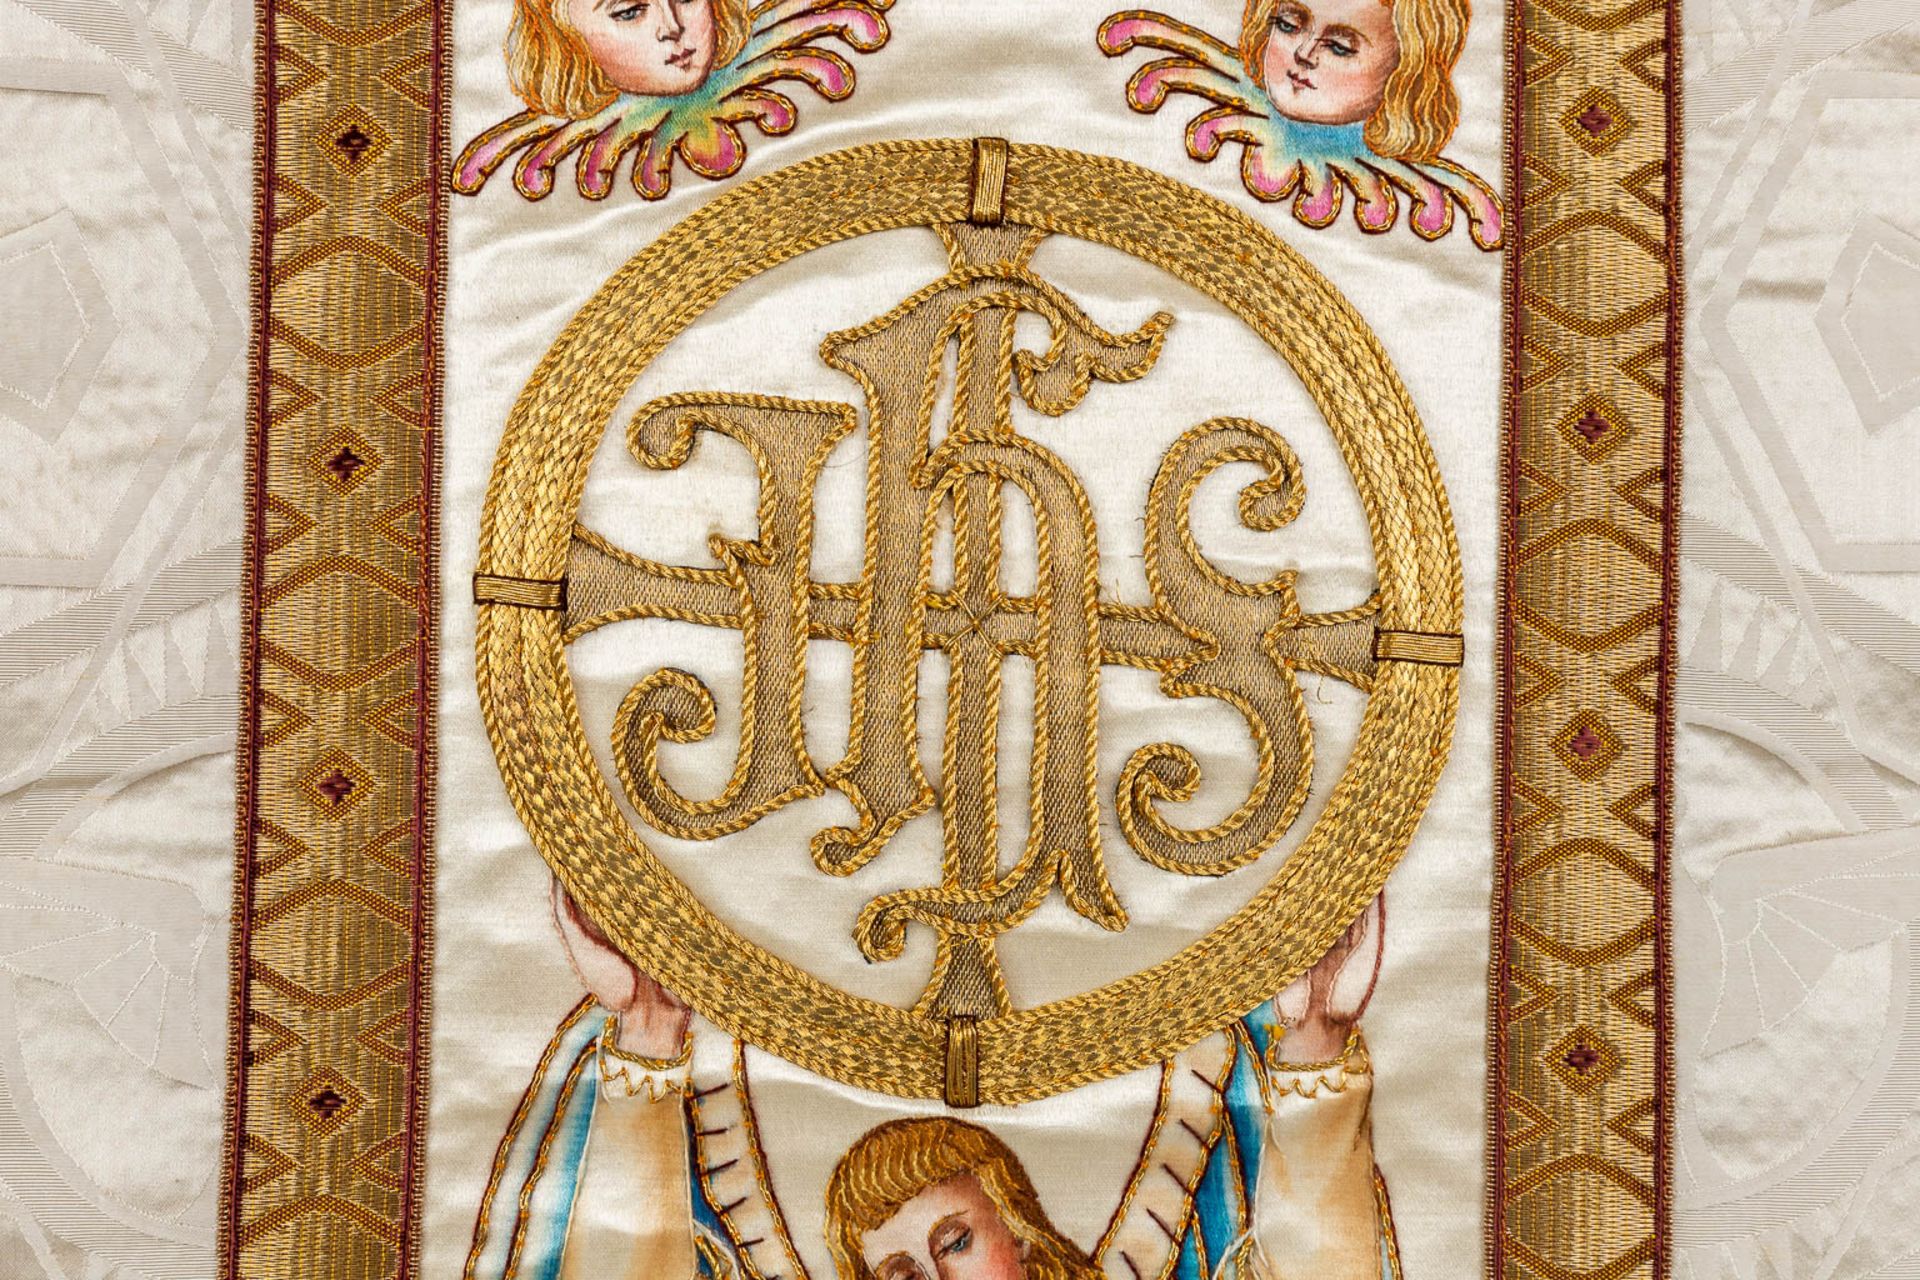 A set of Lithurgical Robes and accessories. Thick gold thread and embroideries. - Image 9 of 40